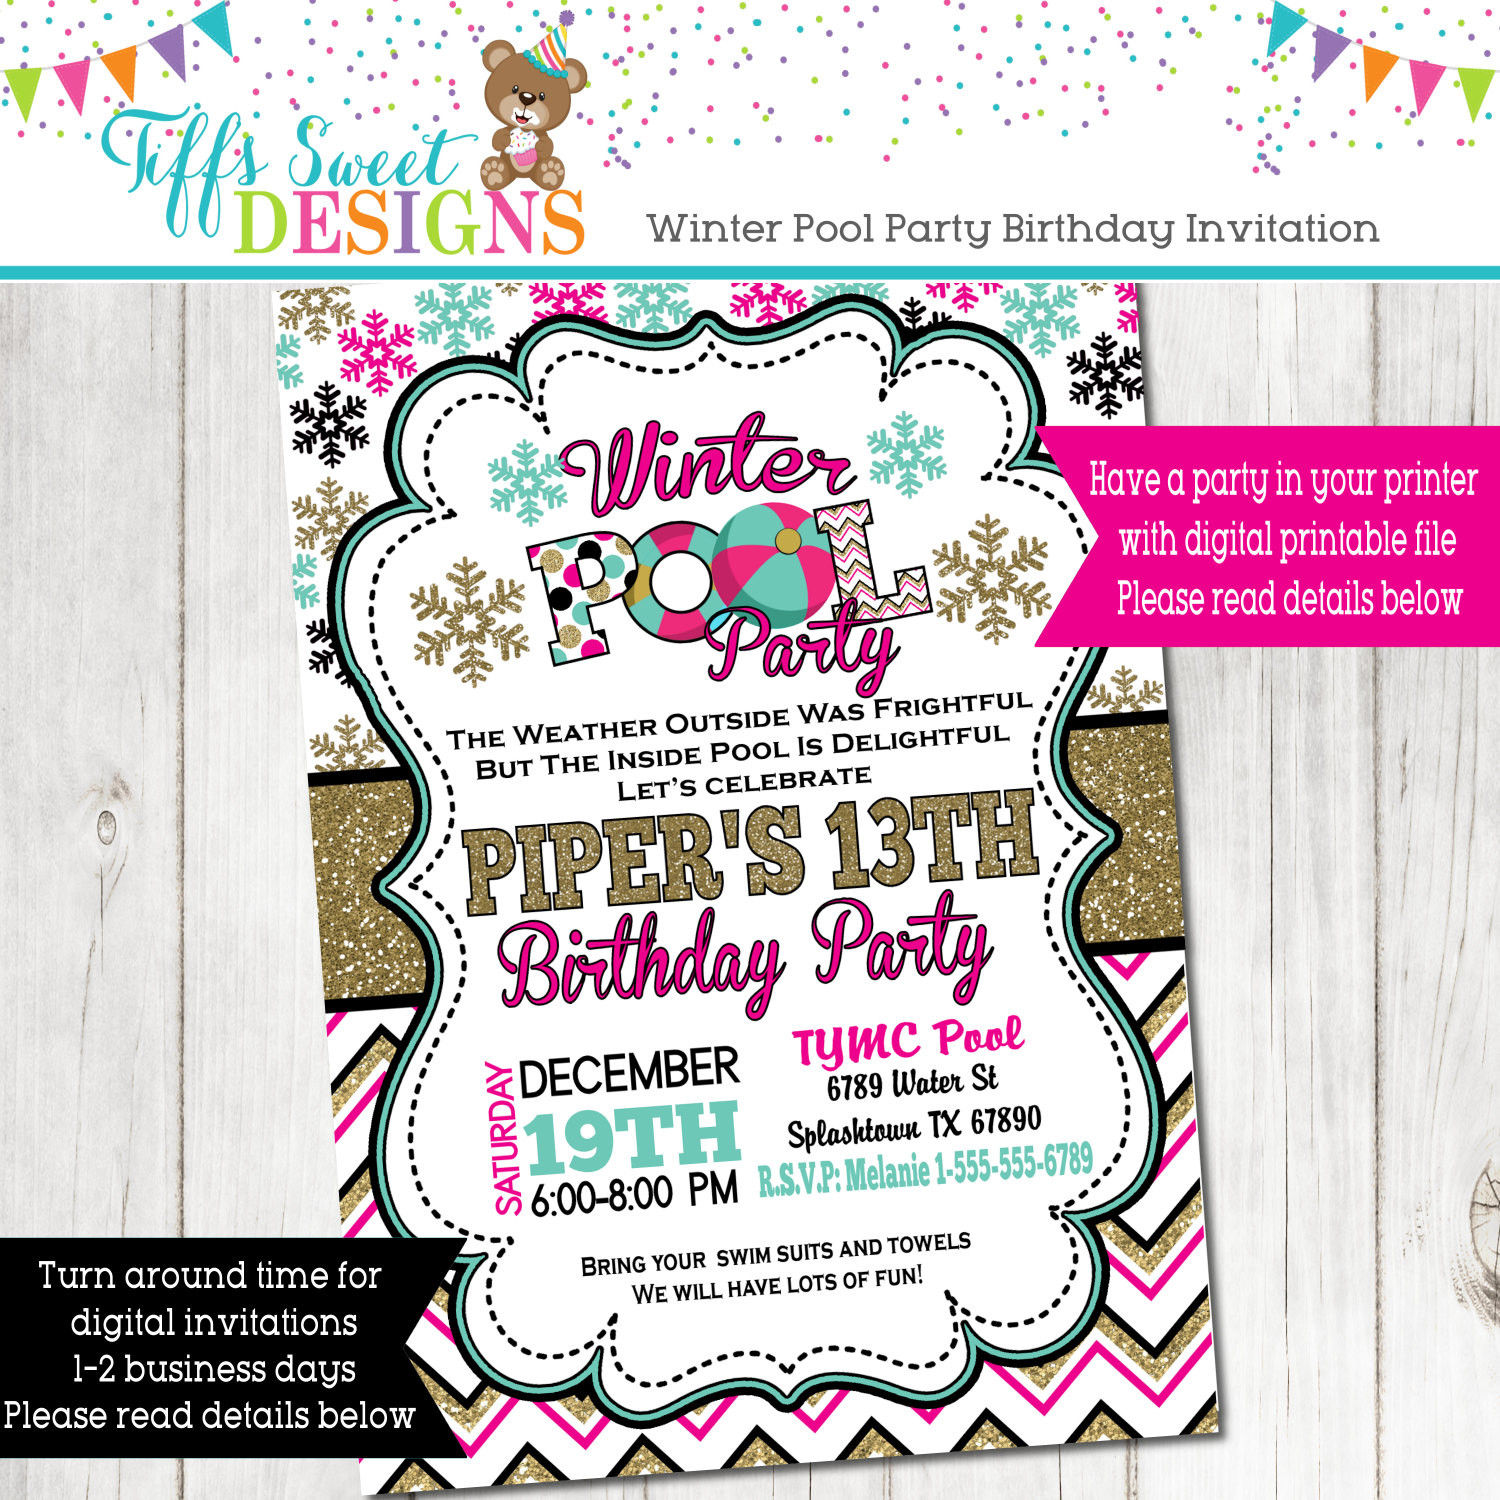 Winter Pool Party Ideas
 Winter Pool Party Invitation Winter Indoor Pool Party